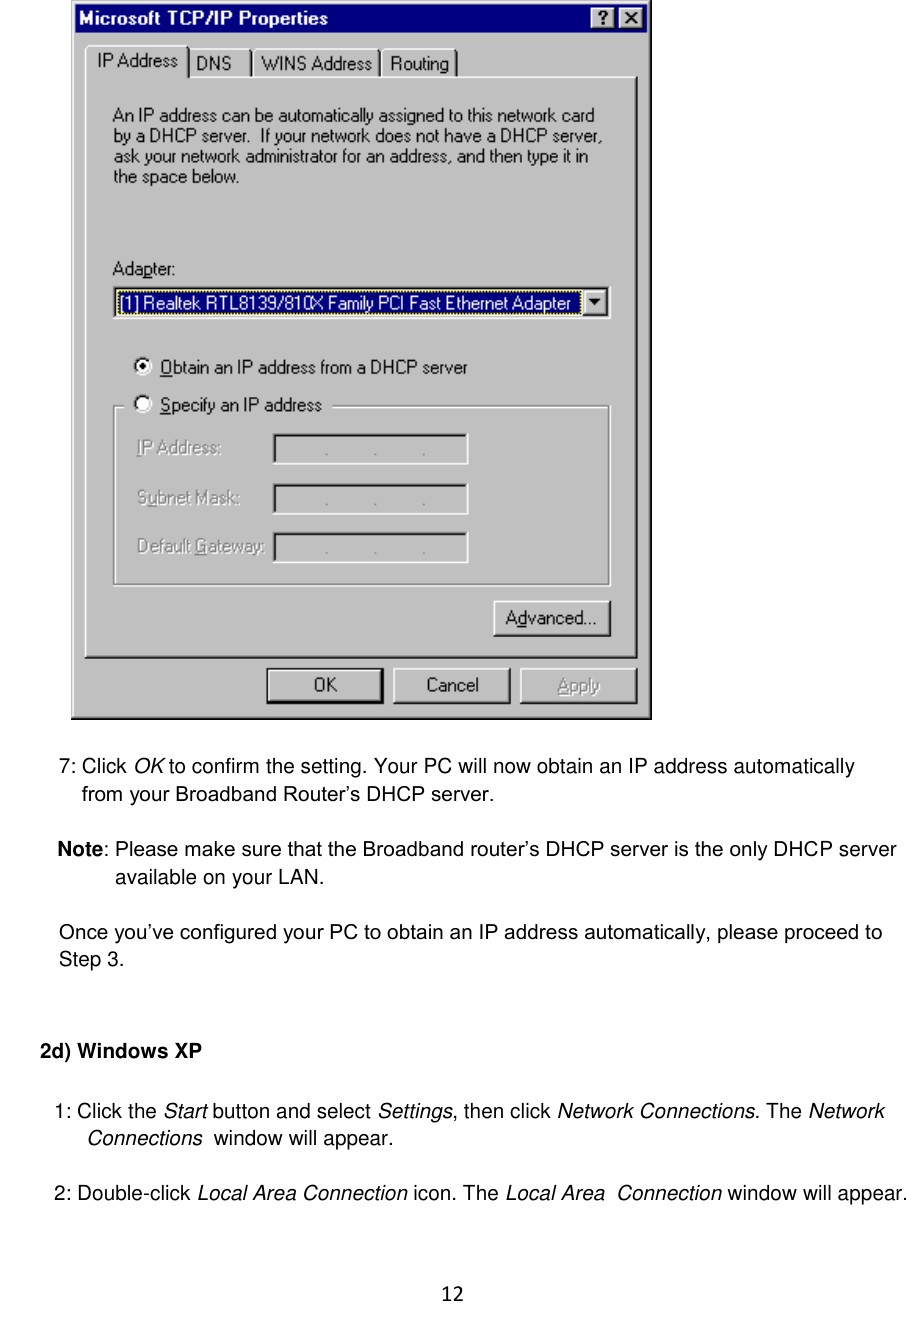 12    7: Click OK to confirm the setting. Your PC will now obtain an IP address automatically     from your Broadband Router‟s DHCP server.  Note: Please make sure that the Broadband router‟s DHCP server is the only DHCP server            available on your LAN.  Once you‟ve configured your PC to obtain an IP address automatically, please proceed to  Step 3.   2d) Windows XP  1: Click the Start button and select Settings, then click Network Connections. The Network Connections  window will appear.  2: Double-click Local Area Connection icon. The Local Area  Connection window will appear.  